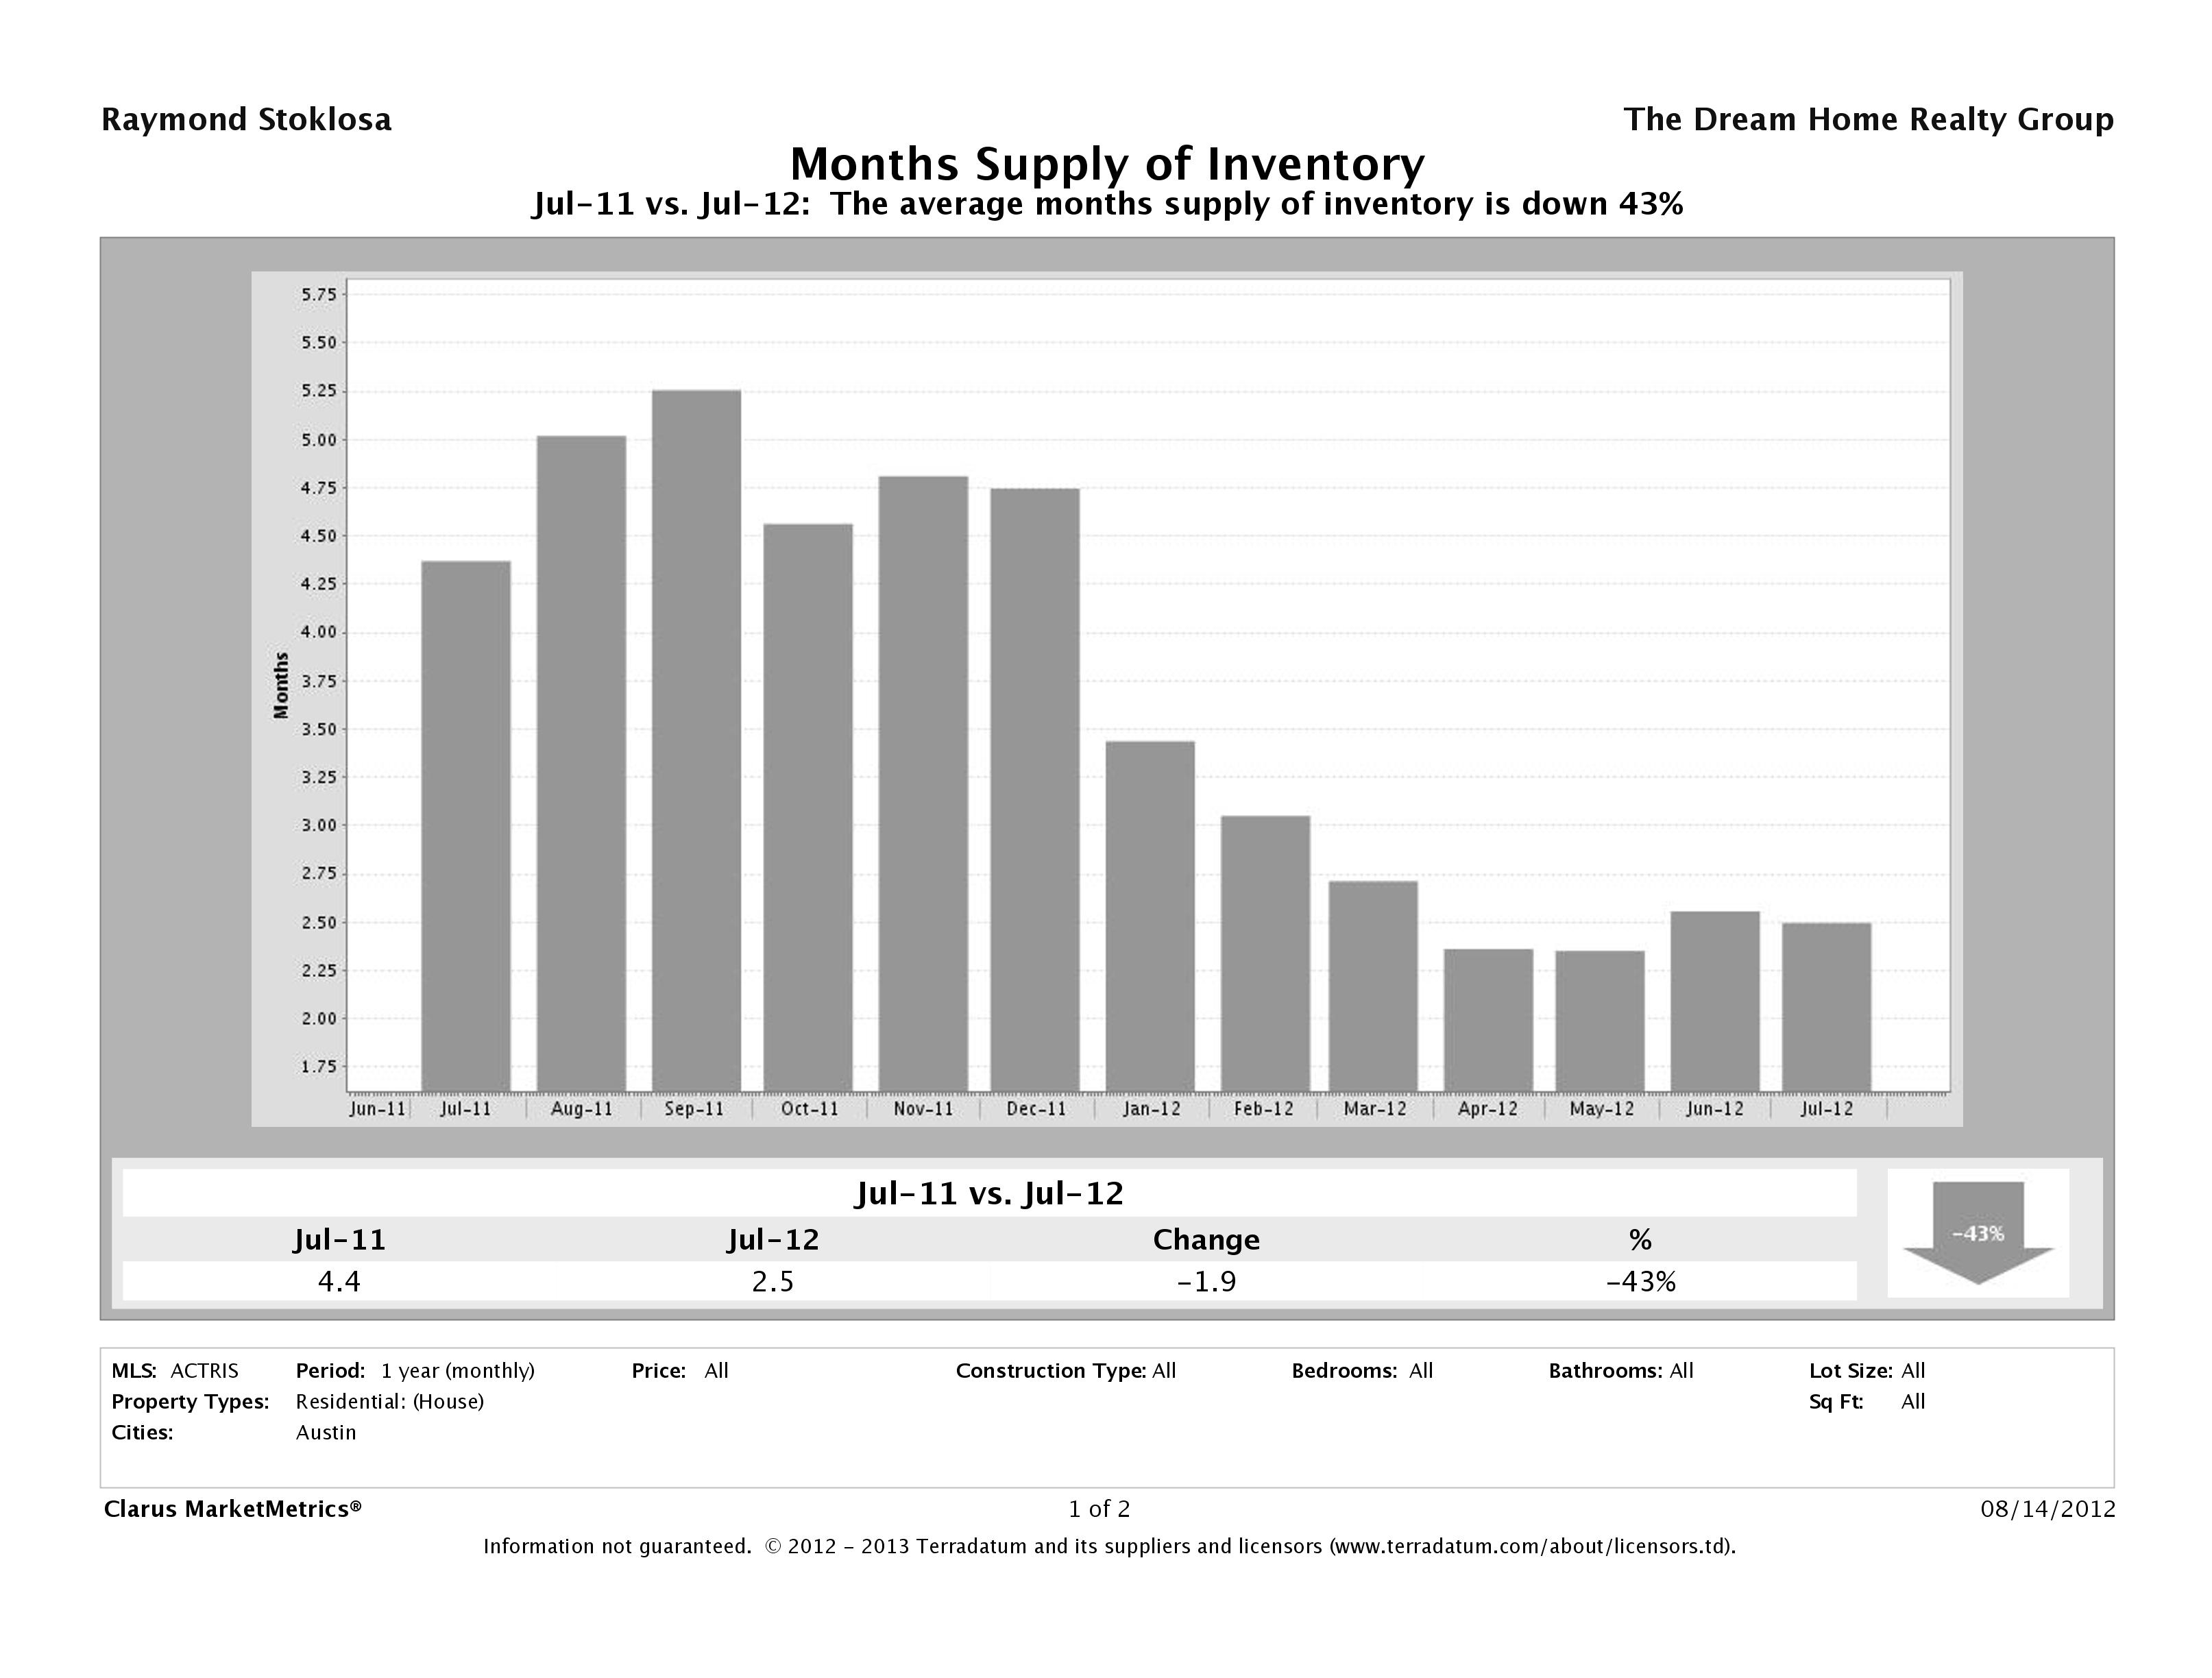 Austin single family home months inventory July 2012